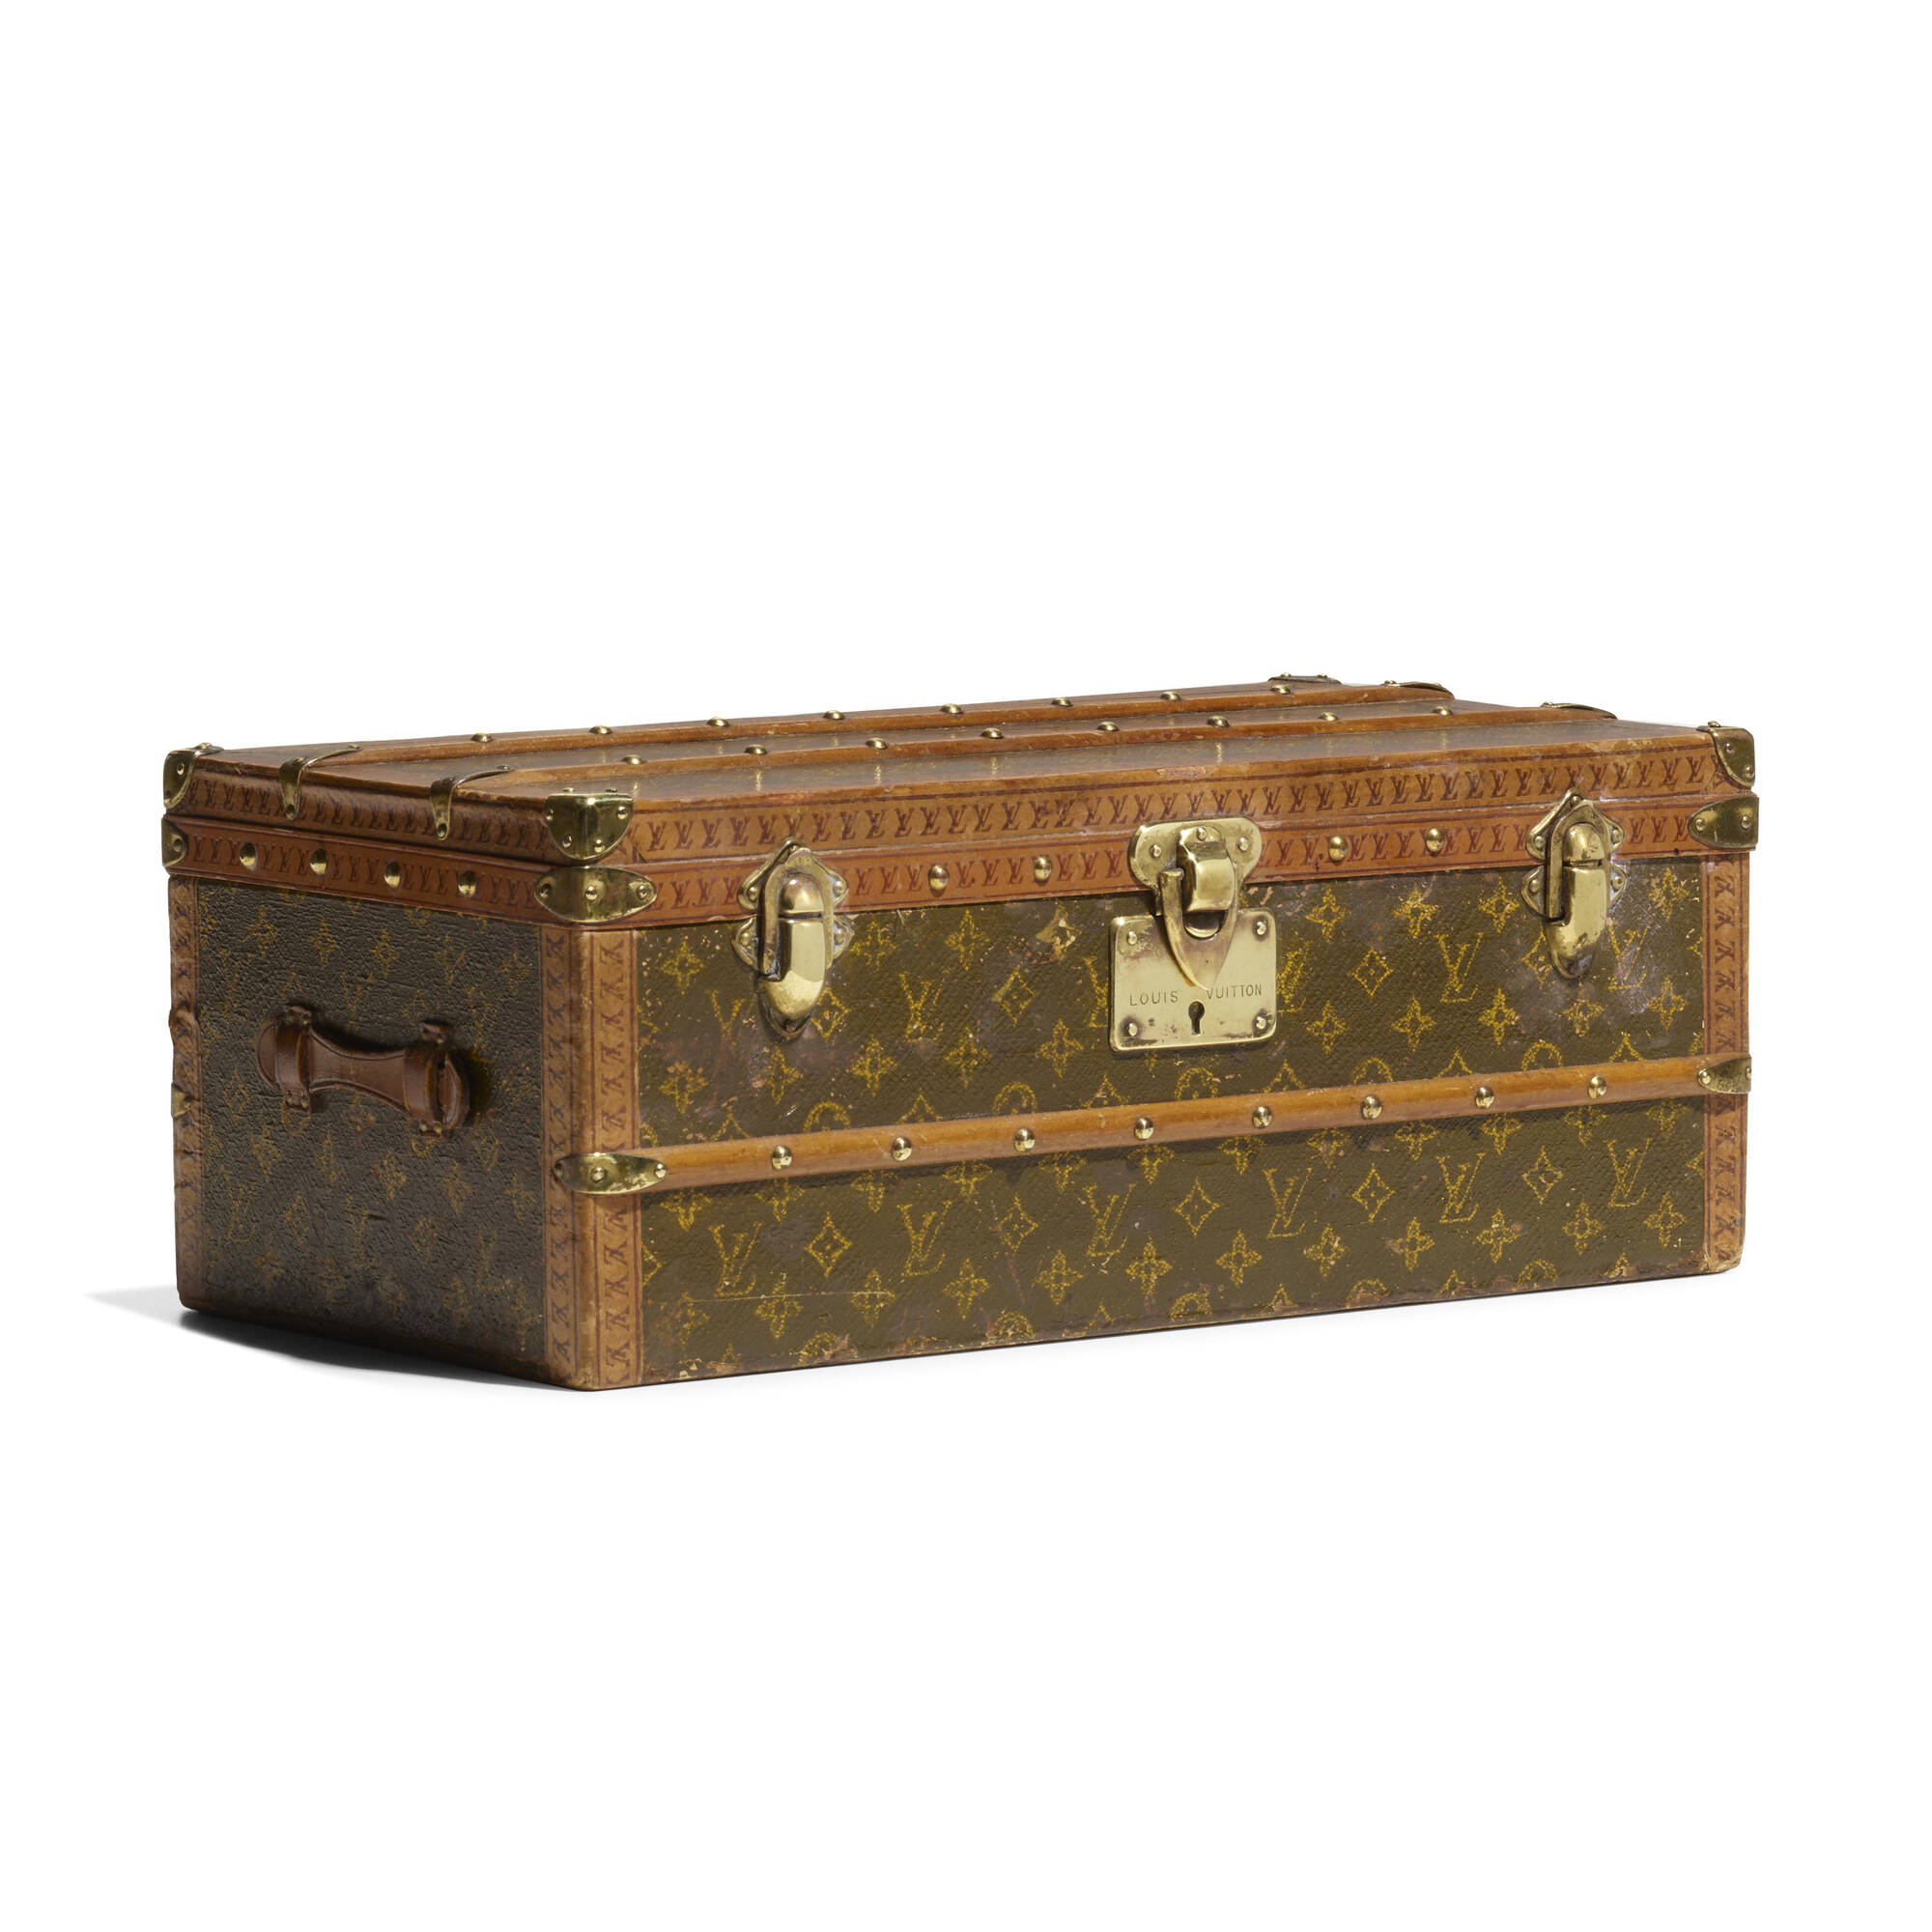 Rare by Oulton - The Louis Vuitton Flower Trunks were